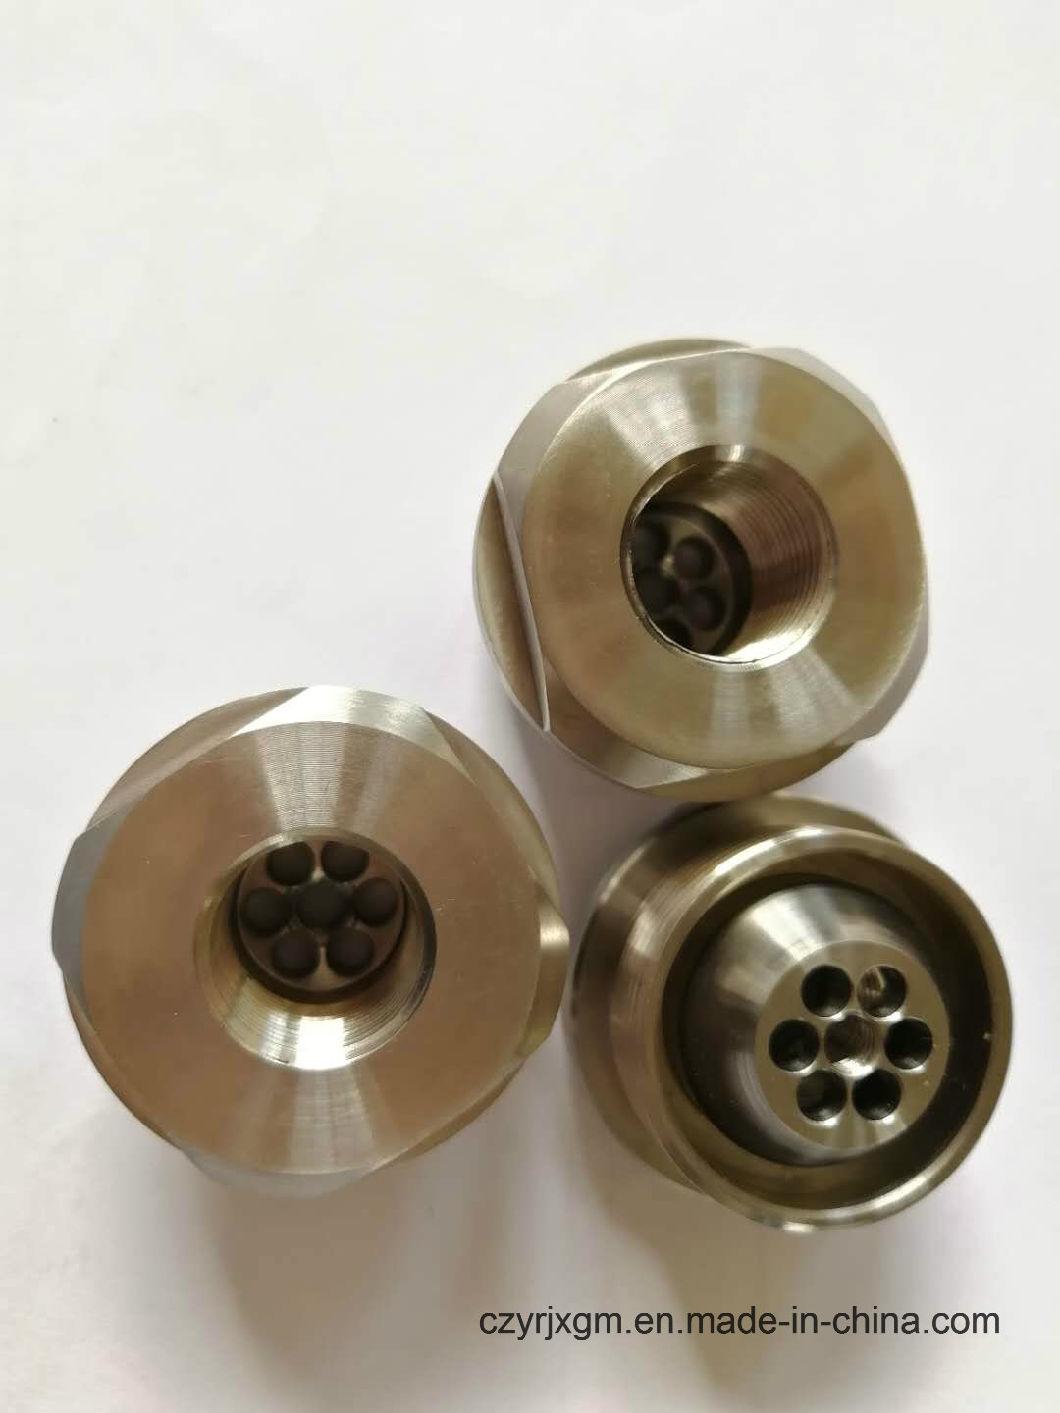 High Precision Custom Machining Part in Stainless Steel